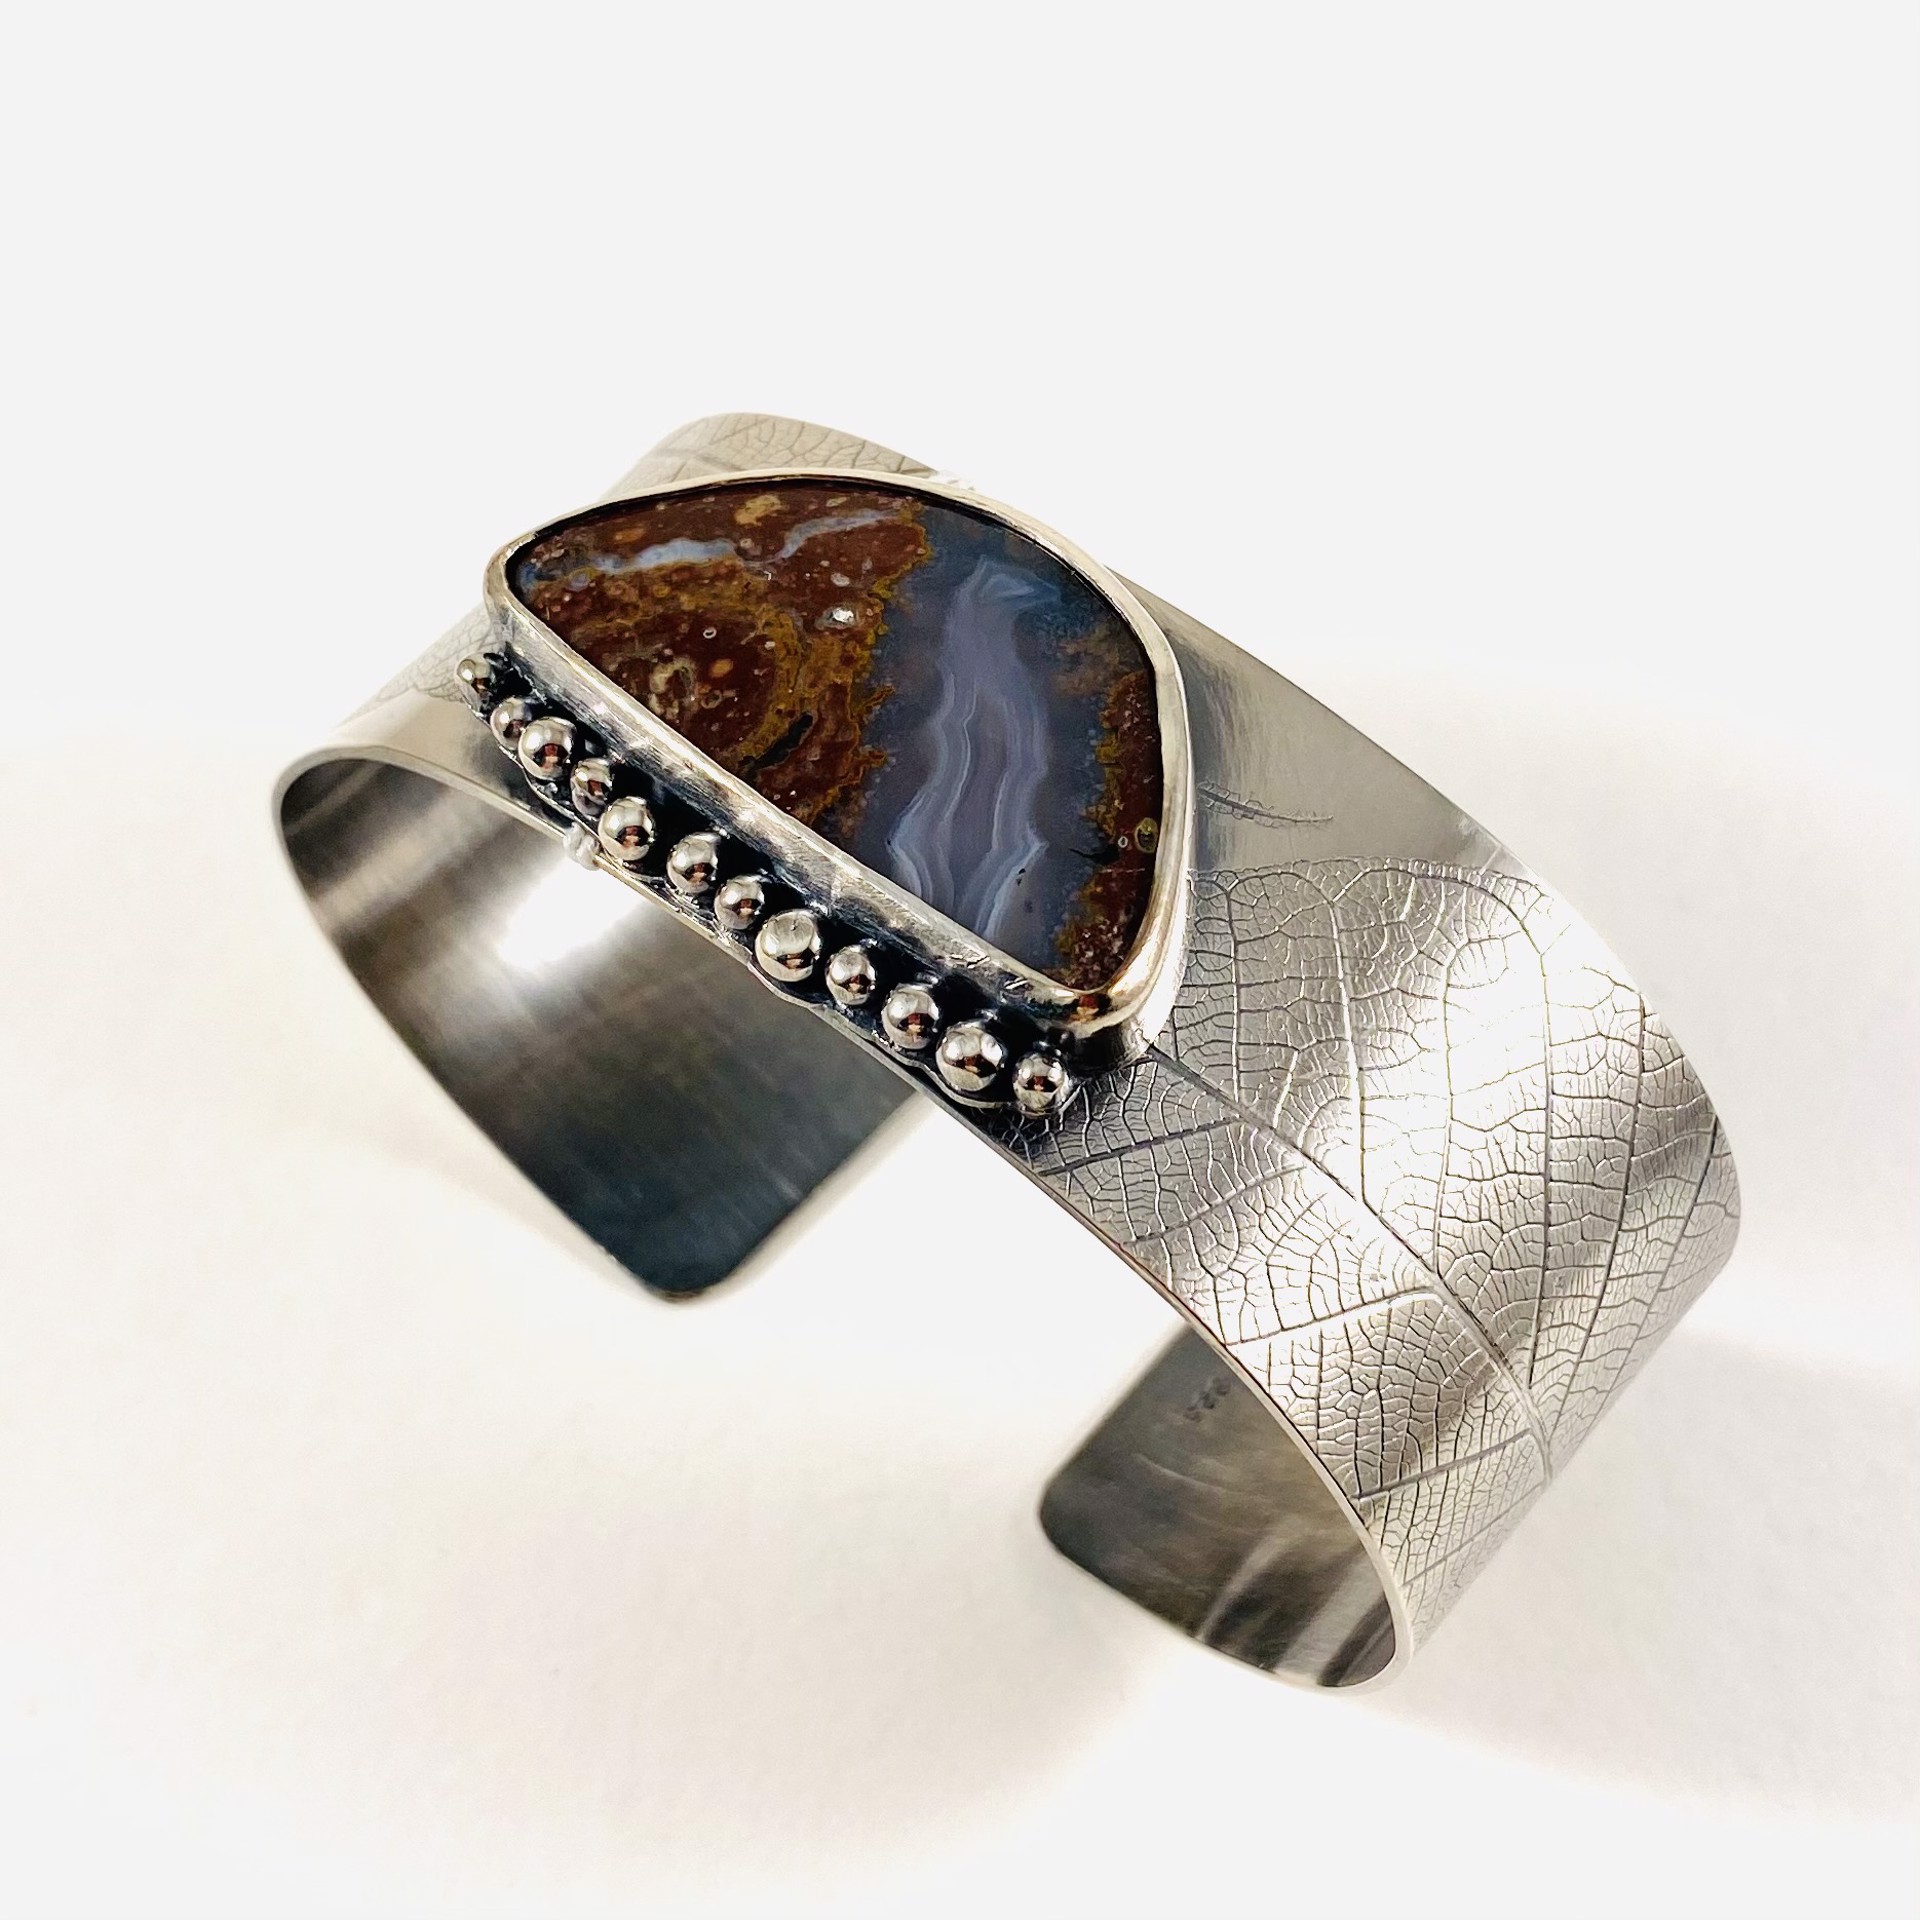 #18 Sterling and Fancy Agate Cuff Bracelet by Anne Bivens